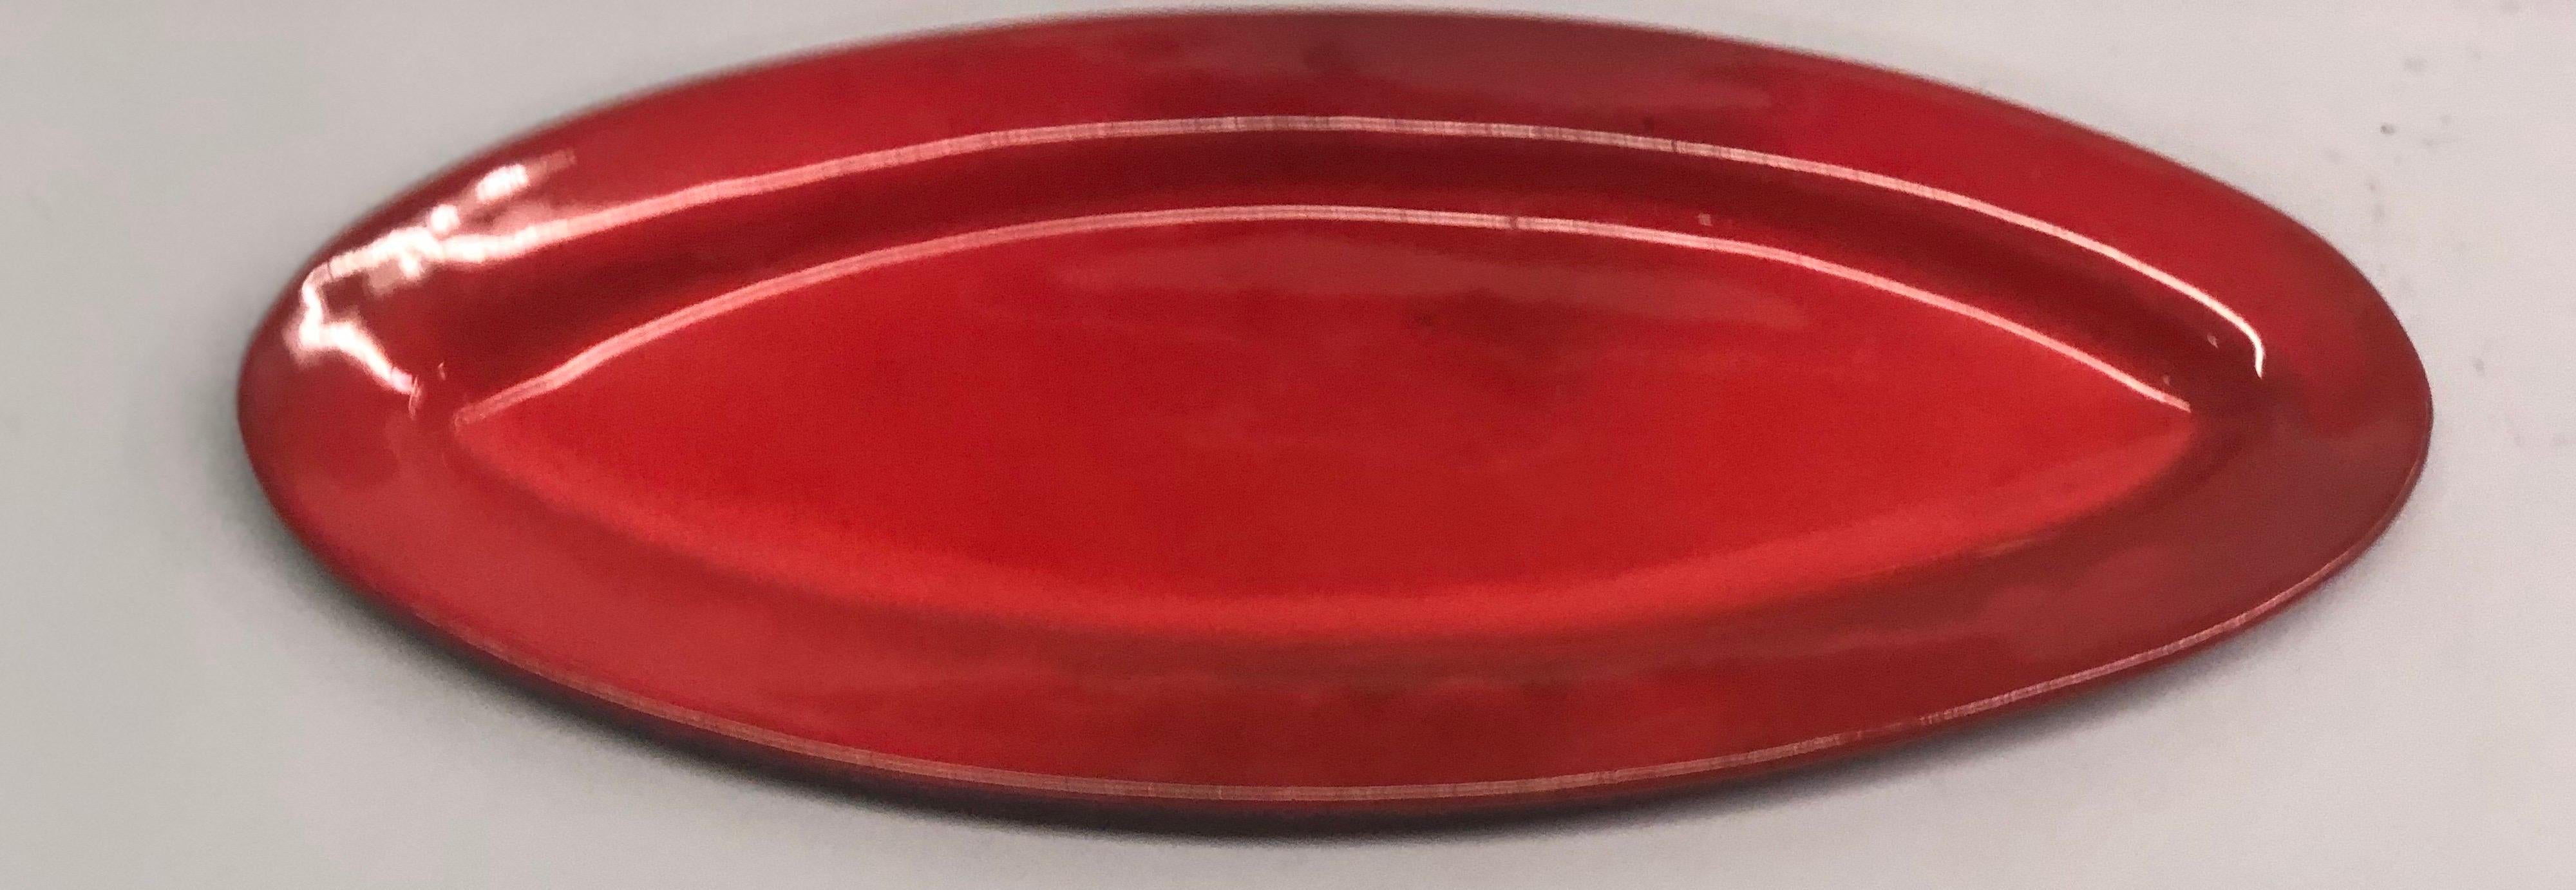 Very large French Mid-Century Modern oval red ceramic serving tray or platter, handmade by Voltz, Vallauris, France circa 1950-1960. Signed on the reverse side, Voltz, Vallauris, France. 

 